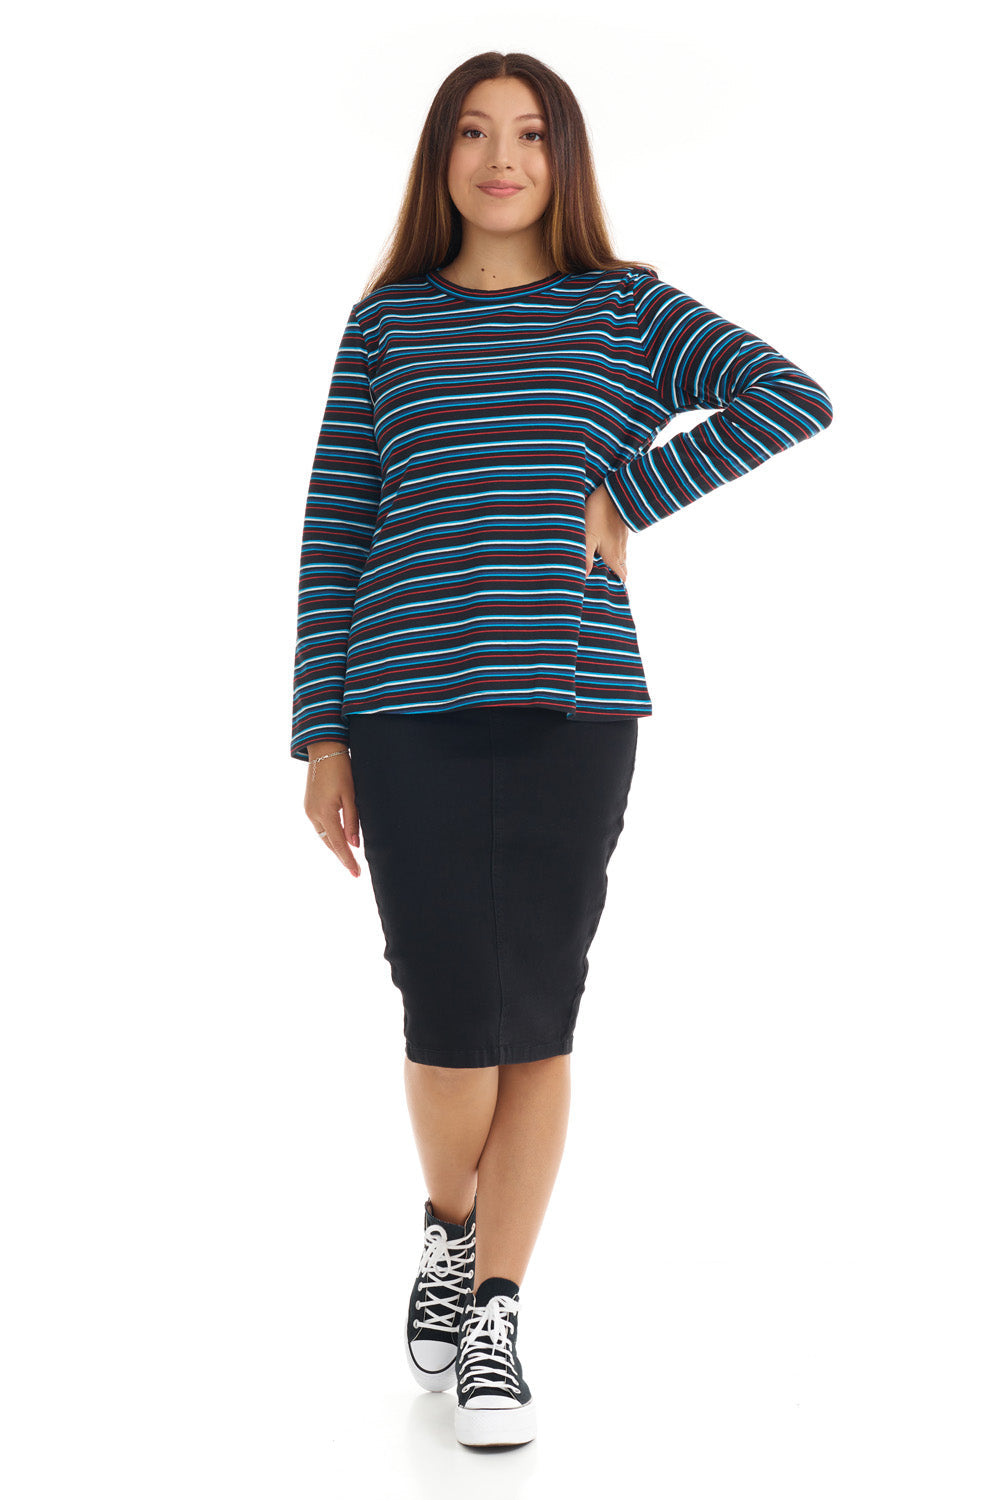 turquoise red white stripes cotton long sleeve tee for women